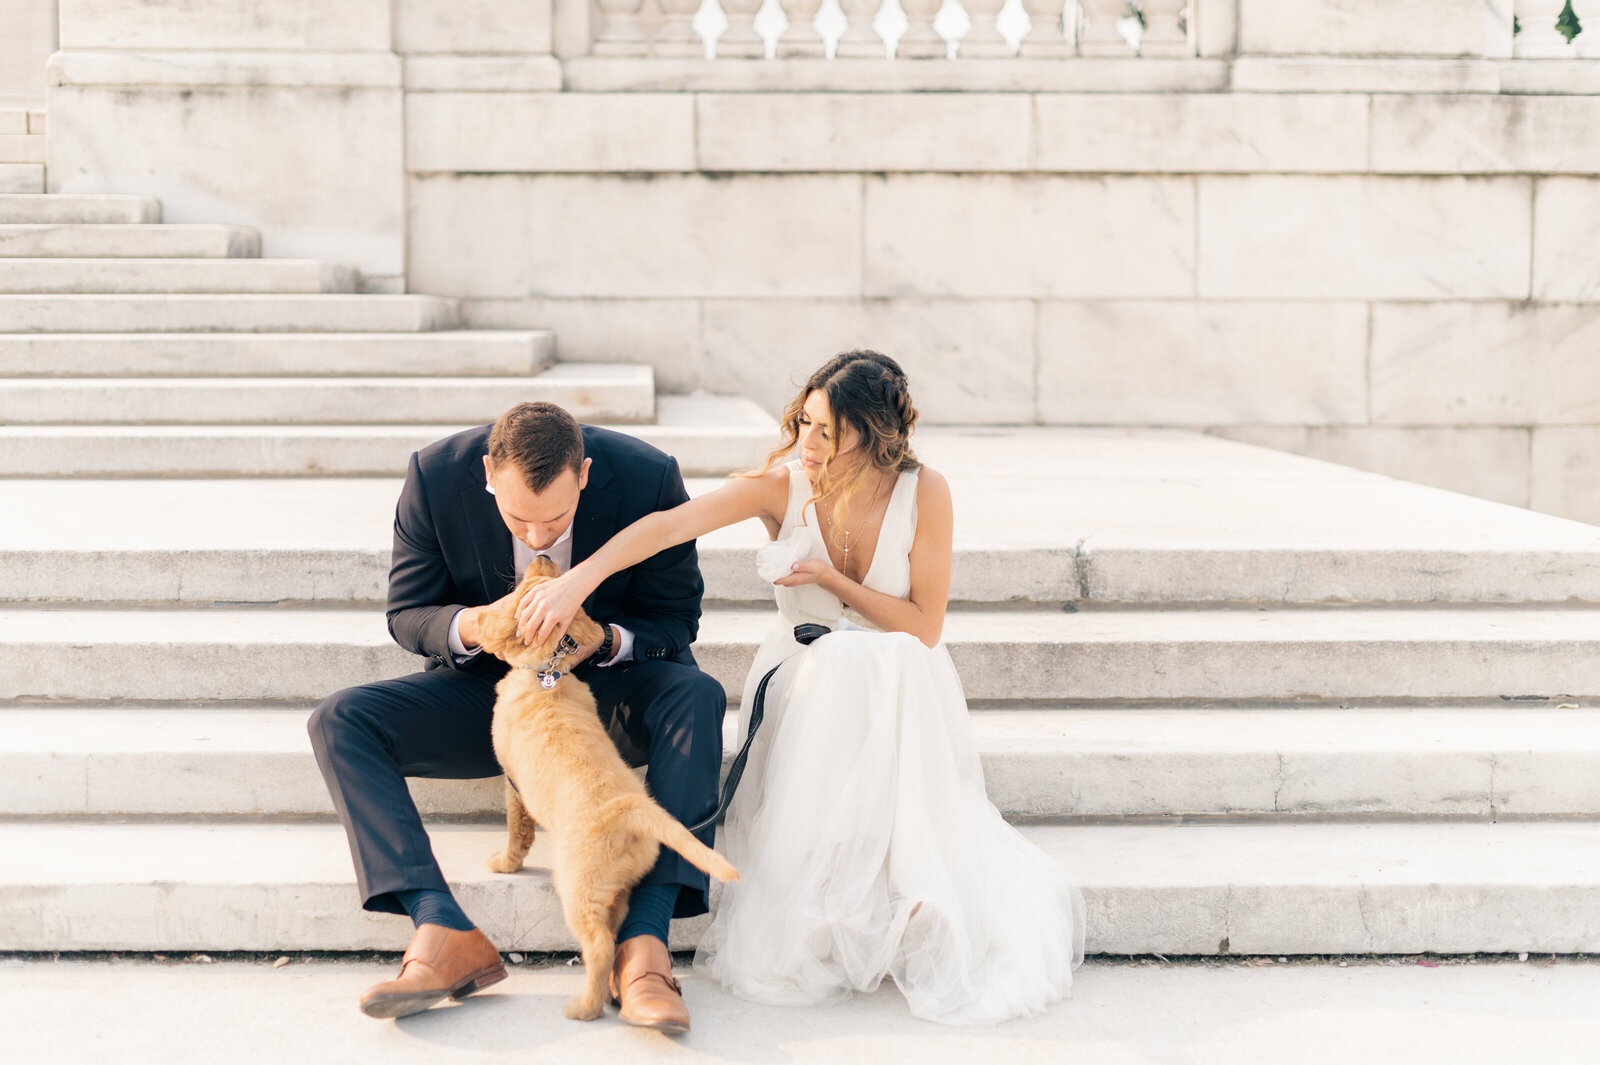 chicago rookery building and board of trade and museum campus wedding photos-8360